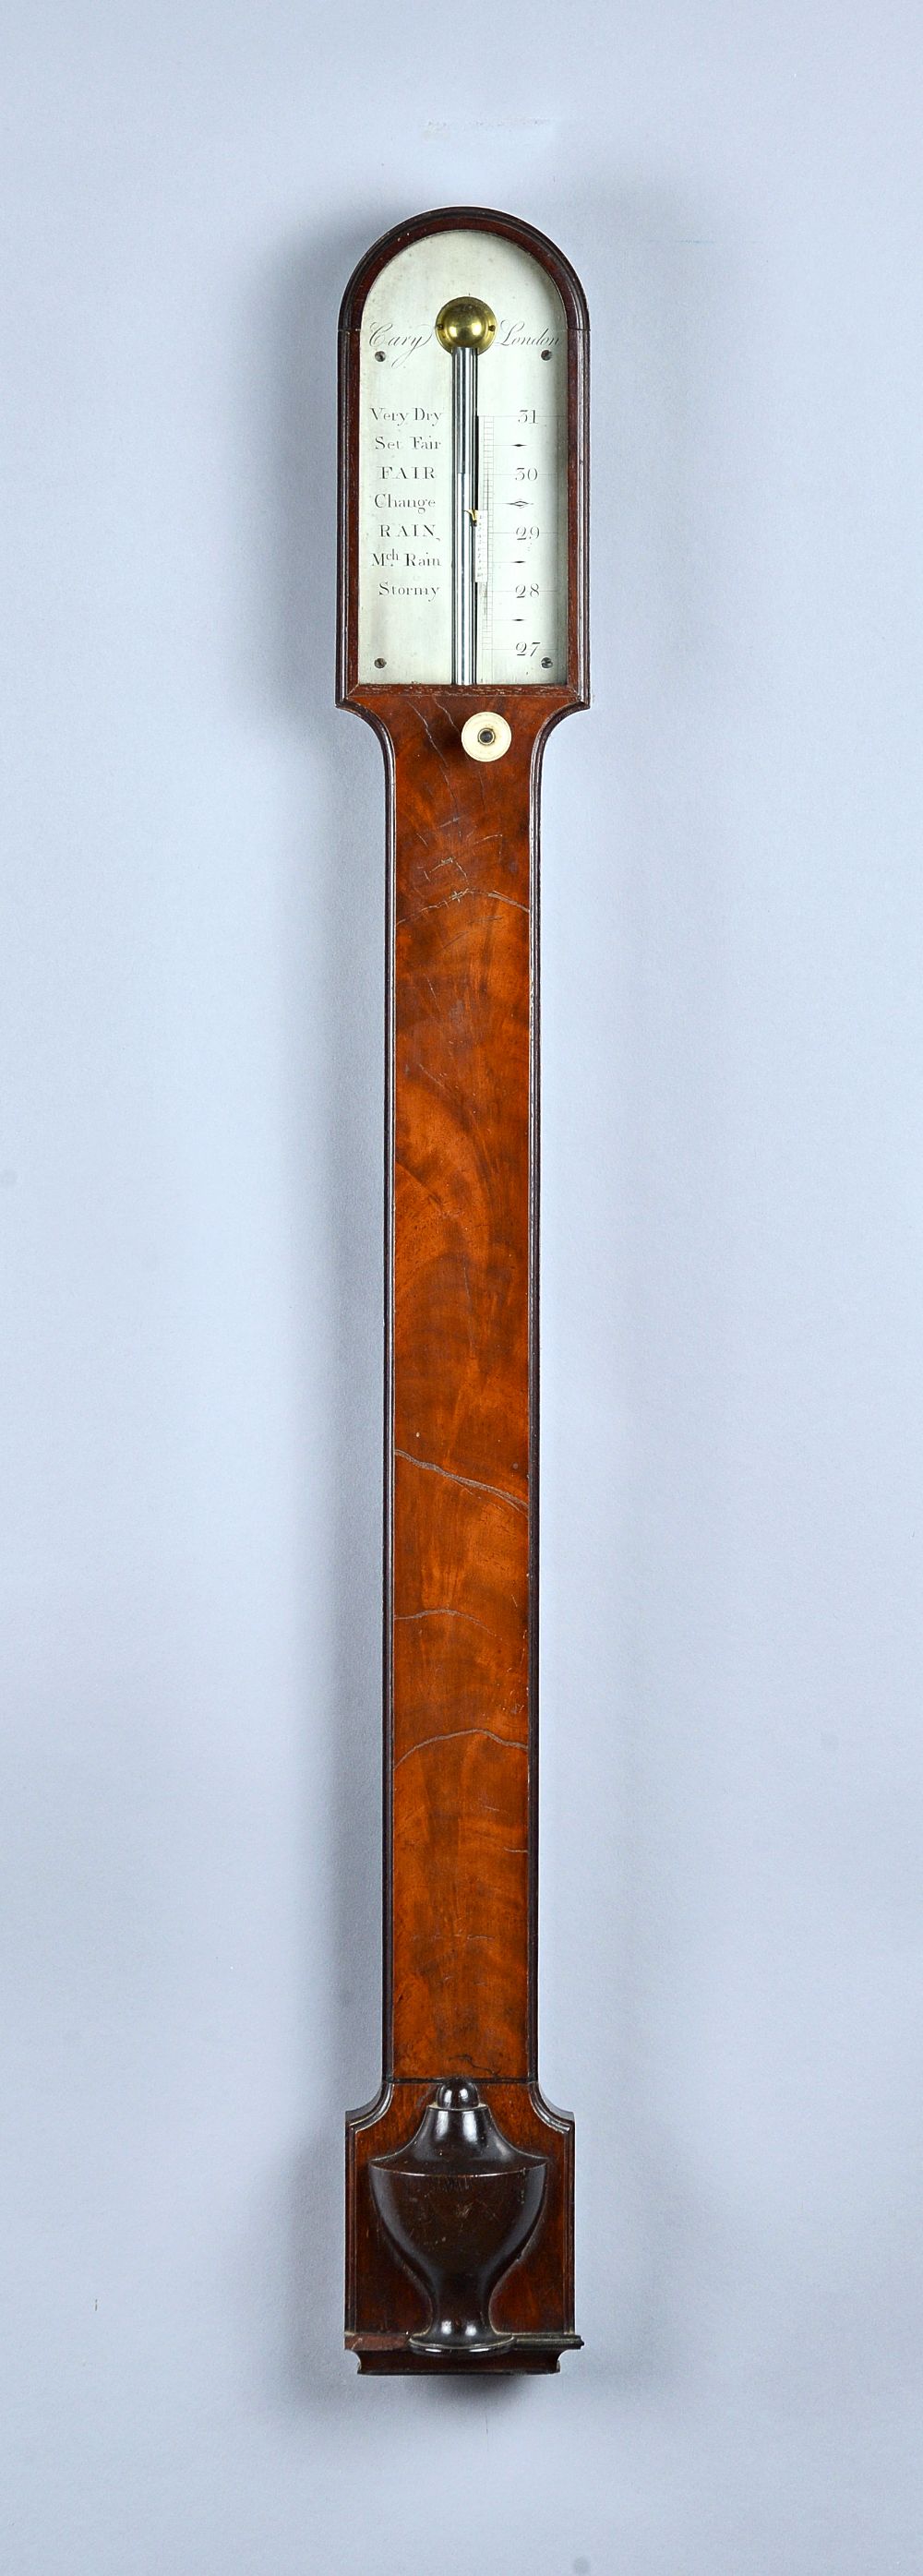 A George III mahogany stick barometer  By Cary, London  With arched silvered scale  96cm high